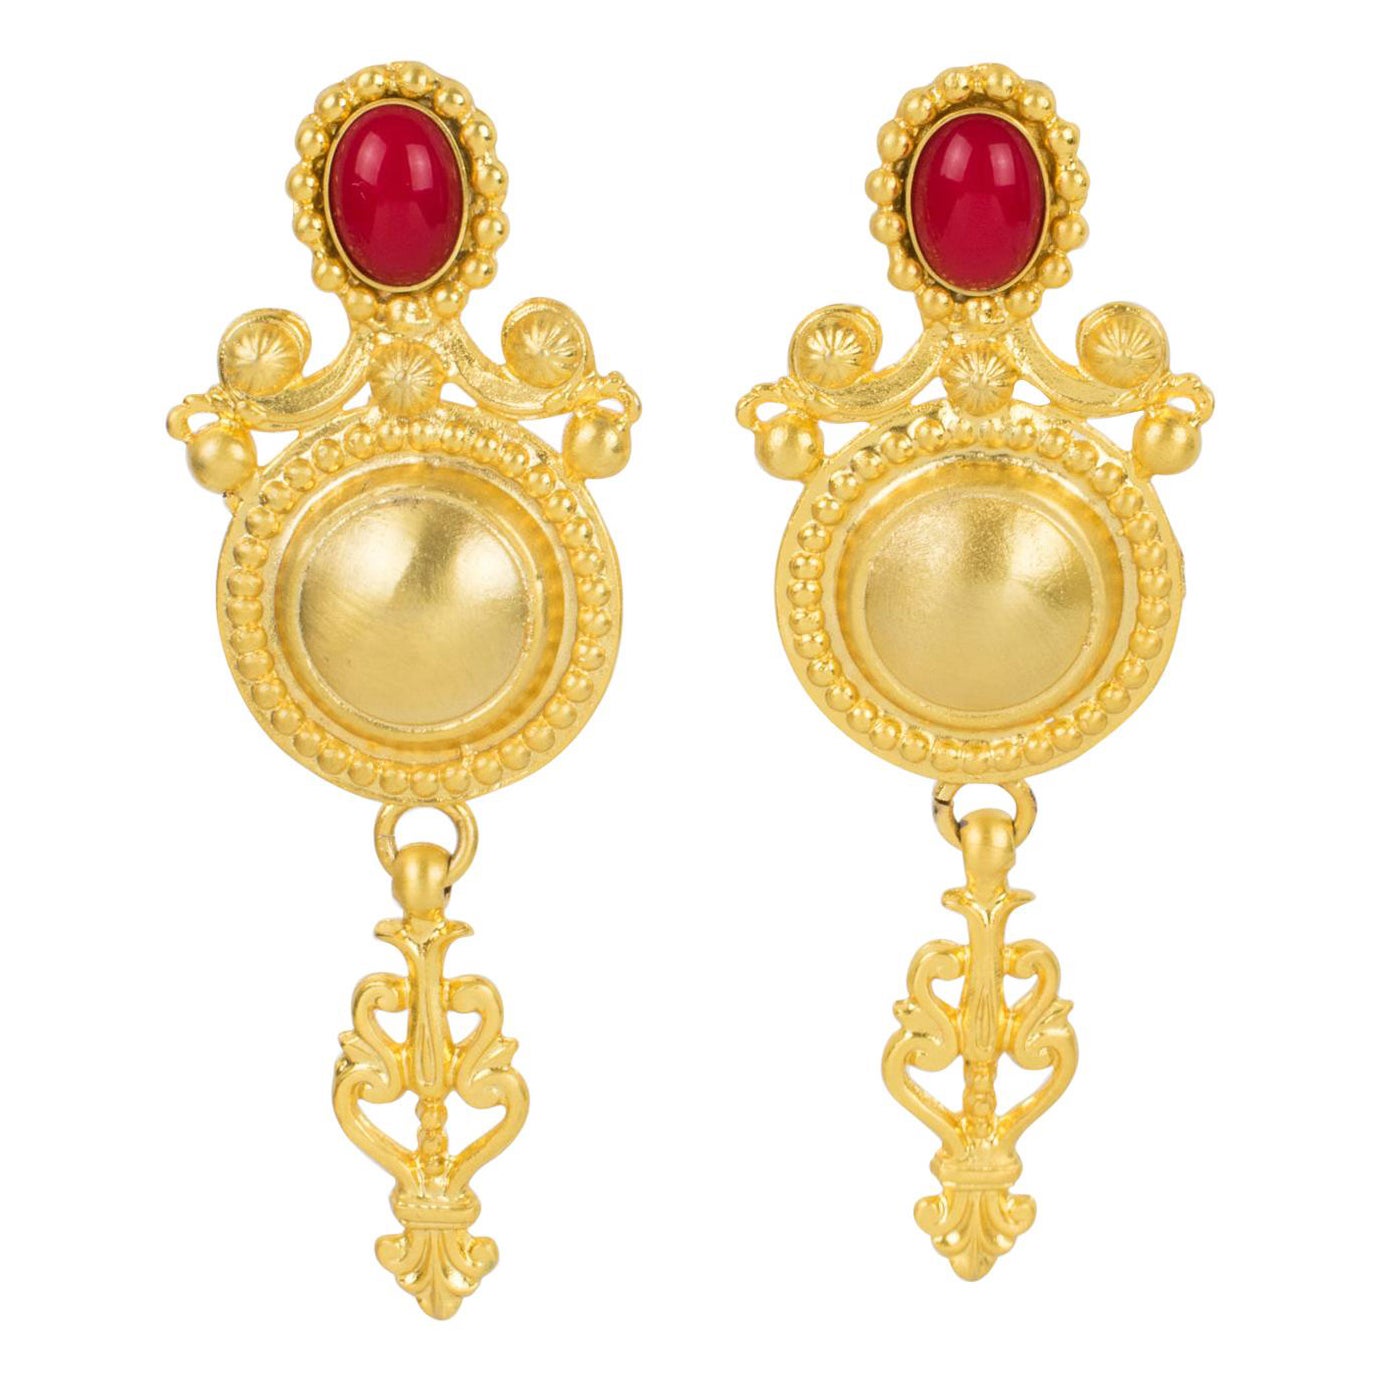 Gianfranco Ferre Gilt Metal Baroque Clip Earrings with Red Cabochon